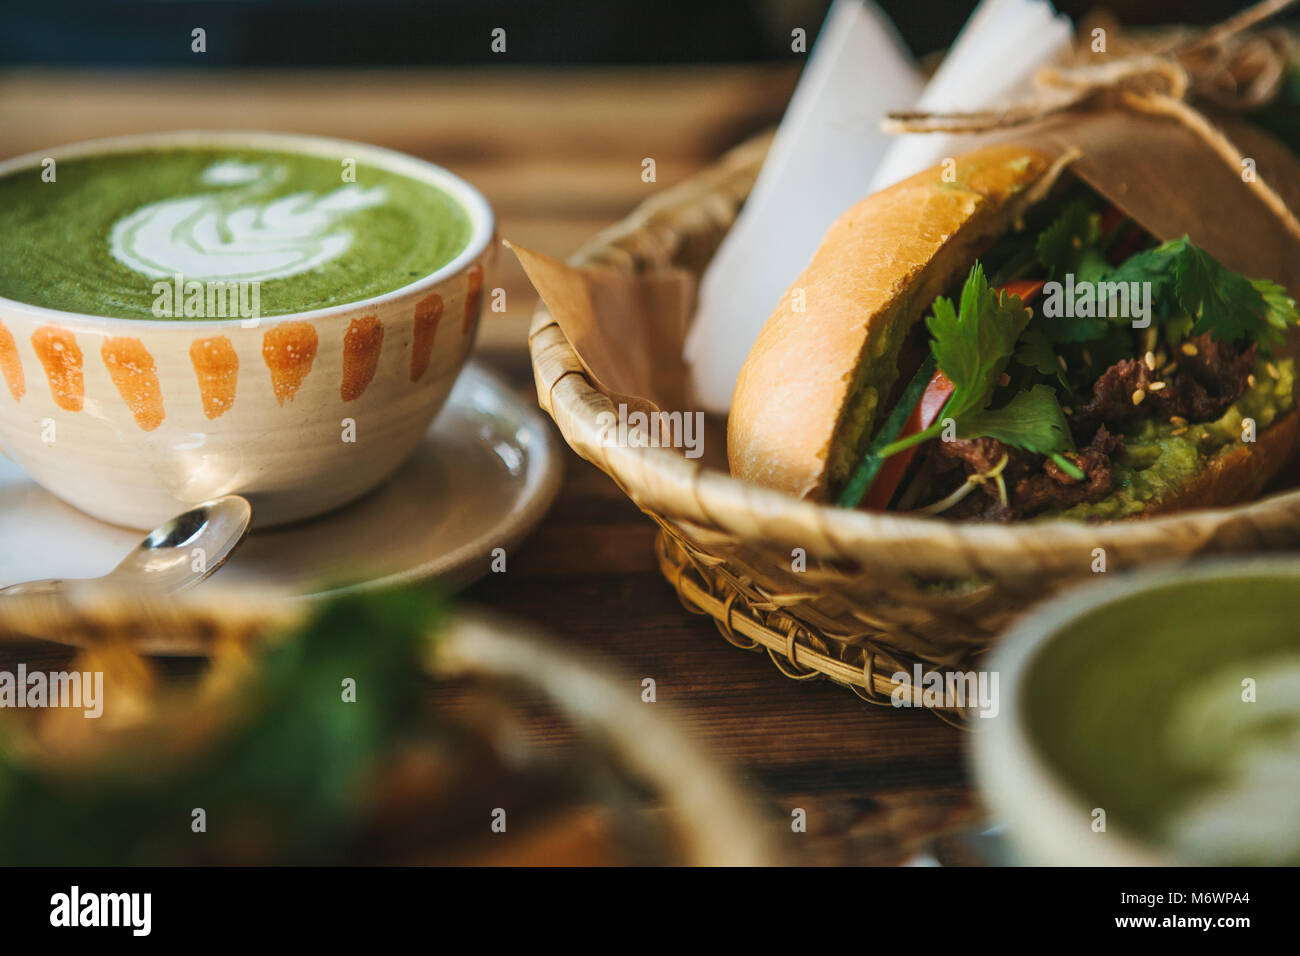 Ceramic cup with green tea called Matcha and a sandwich near Stock Photo